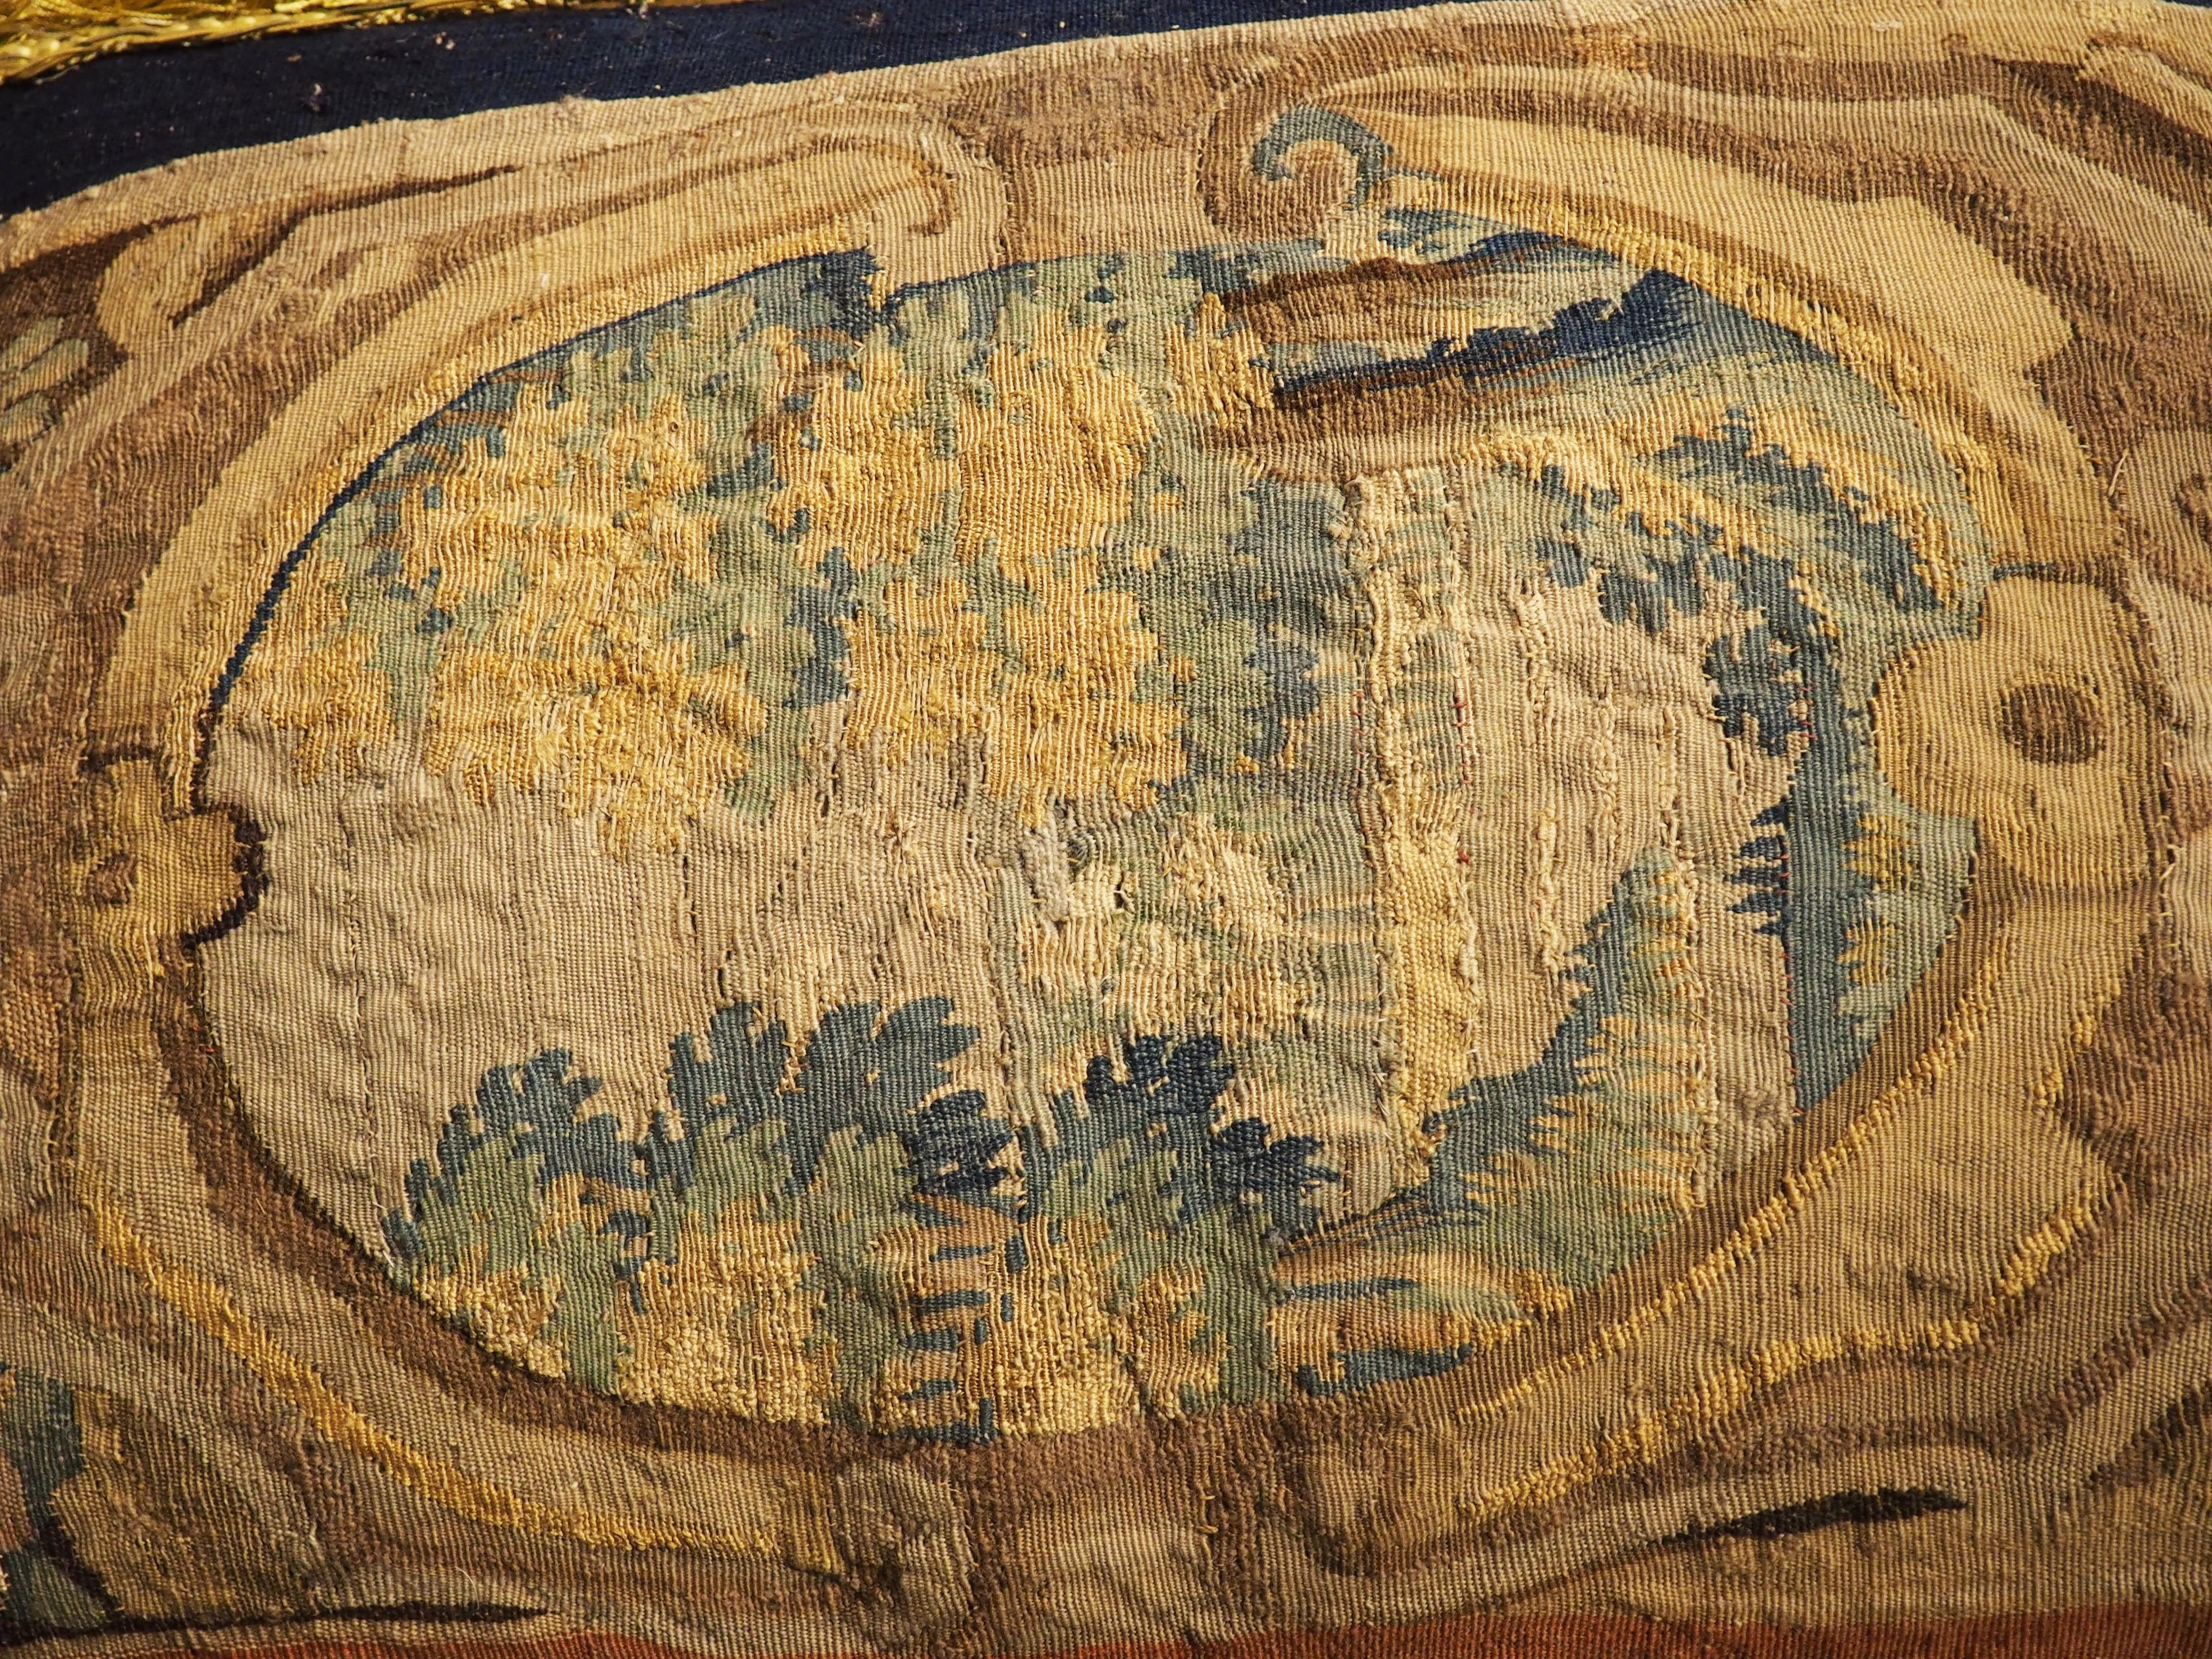 Two Tapestry Pillows from 17th Century Audenarde Fragments 7